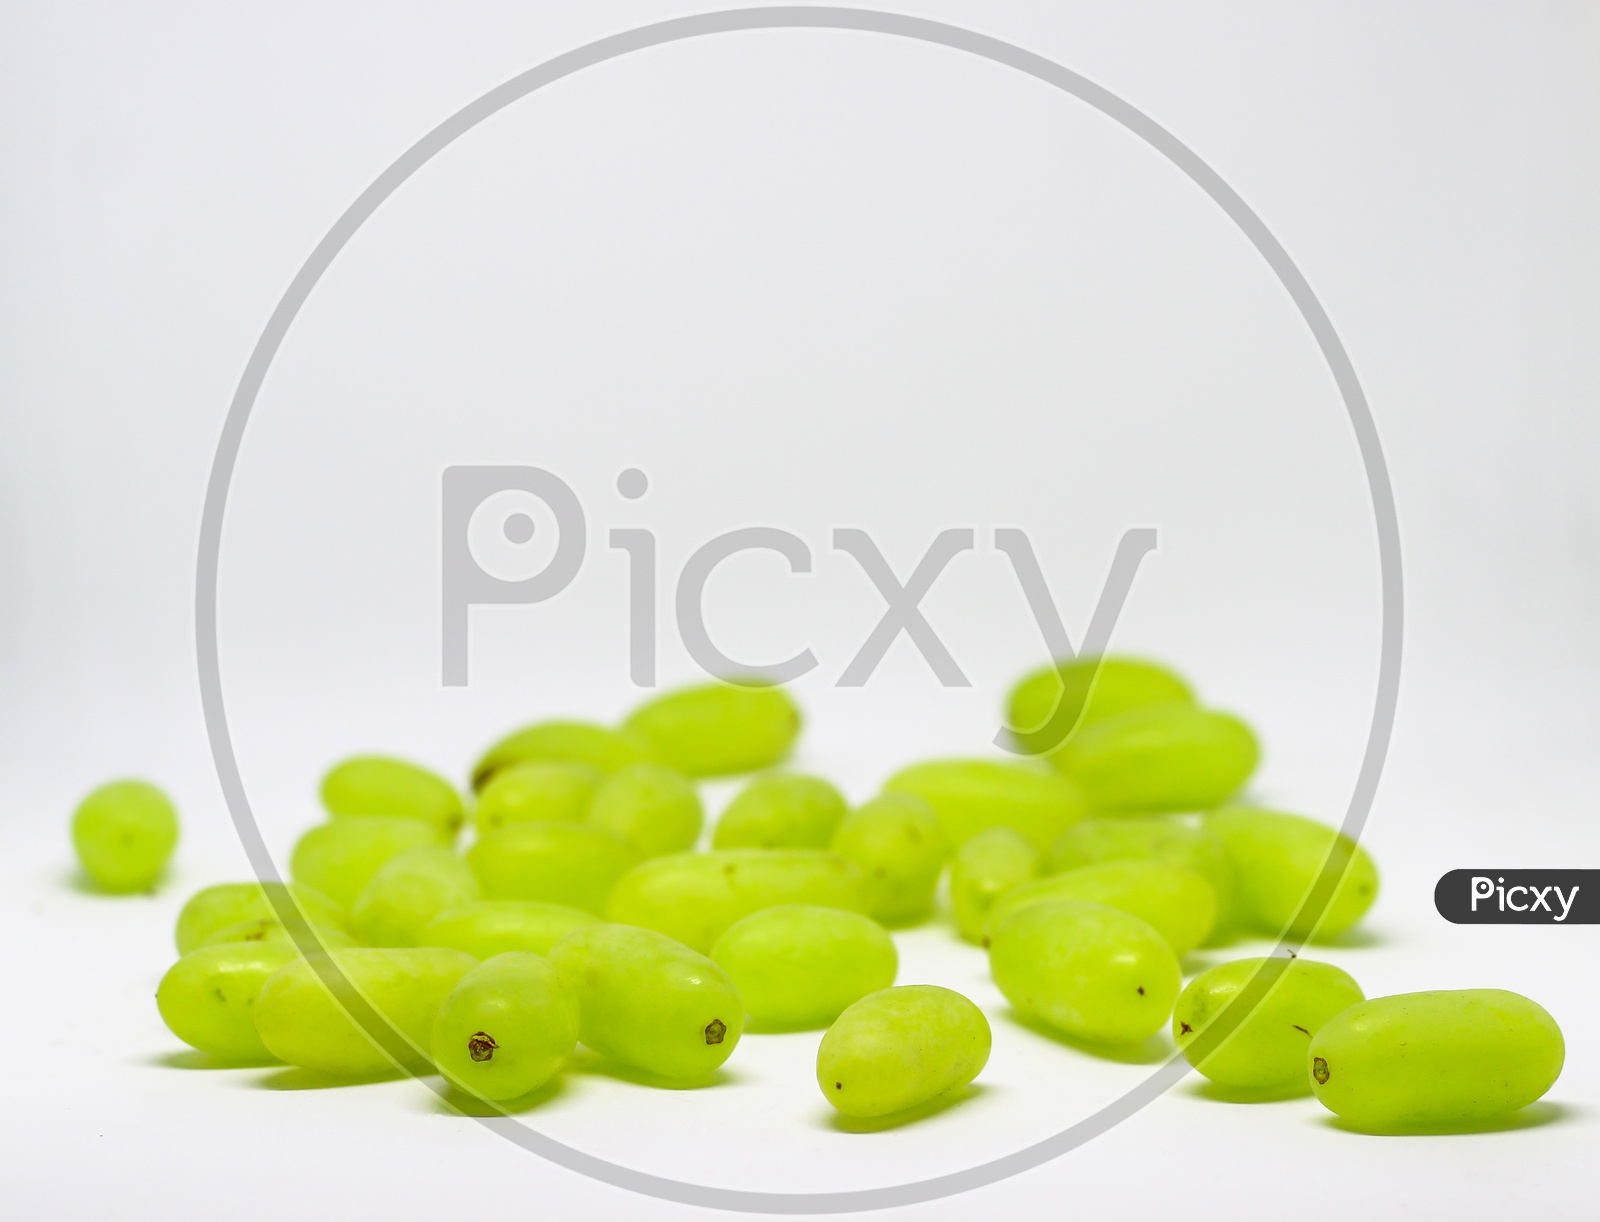 Green Grape Without Branches And Leaves Isolated On White. With Clipping Path. Full Depth Of Field.